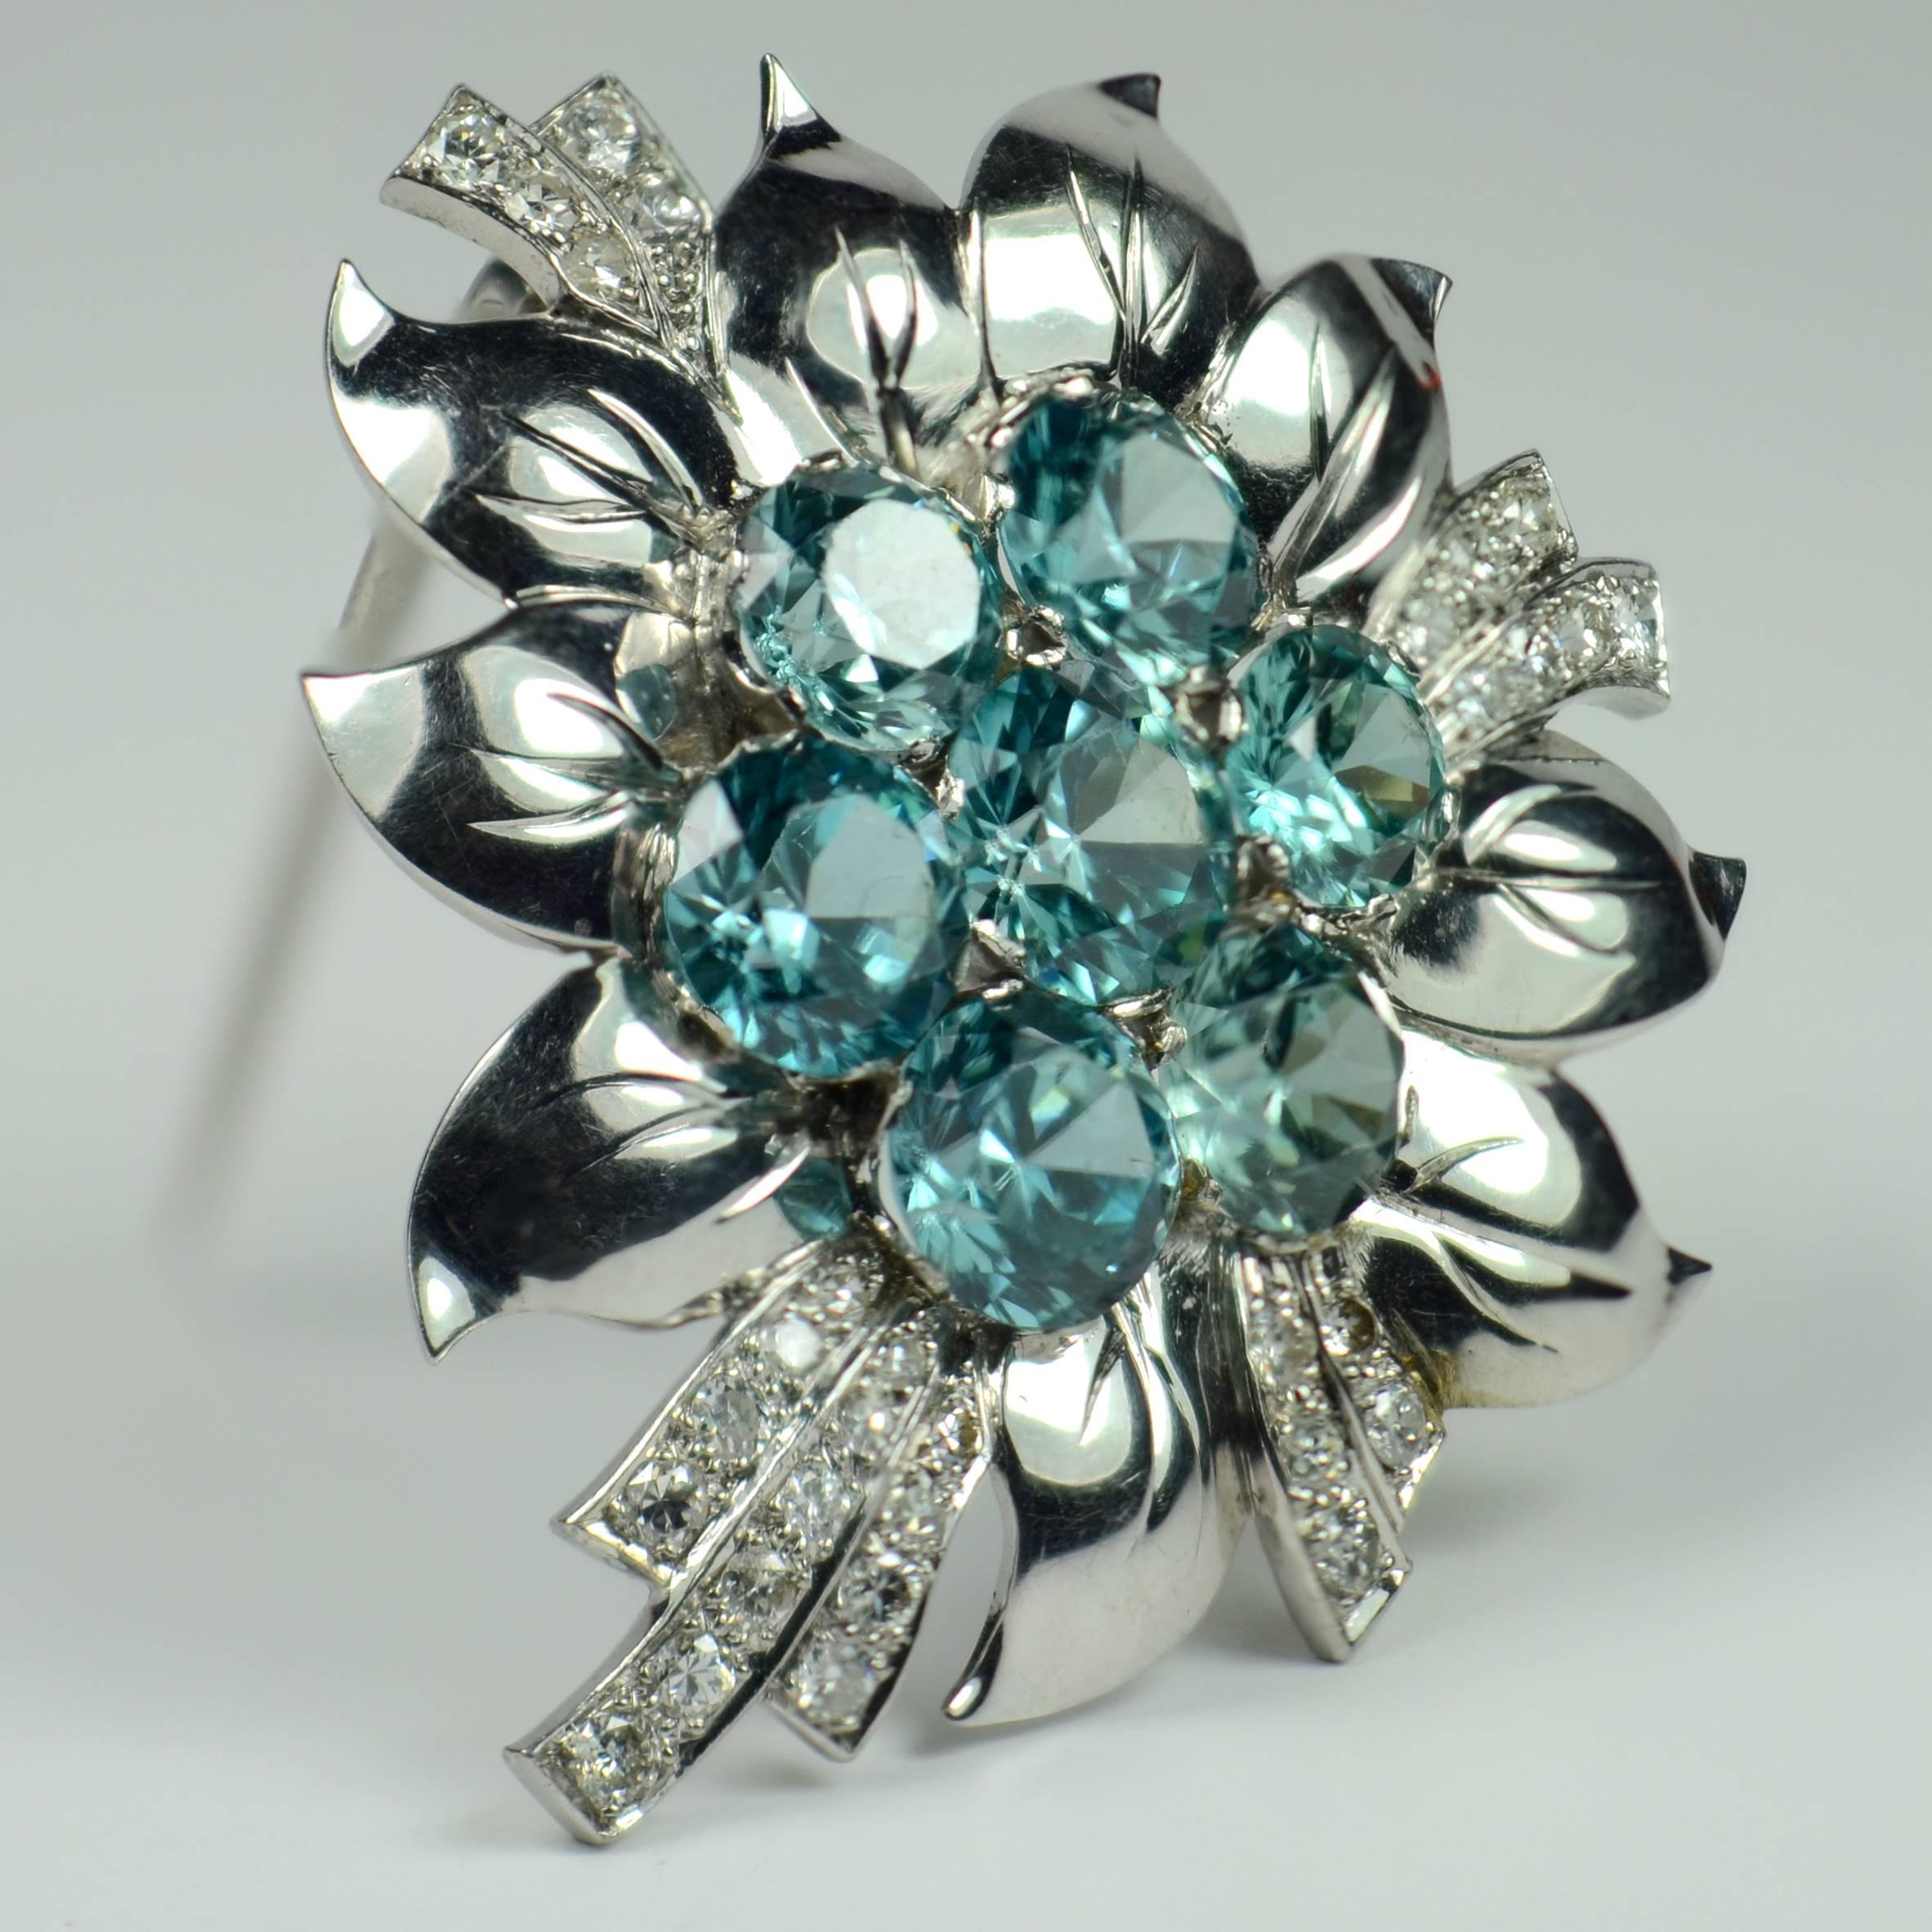 A beautifully made brooch in the form of a flower with a blue zircon heart surrounded by curving platinum leaf shapes with engraved veins and diamond set curved tendrils.

The centre of this brooch is set with seven zircons with a fine sky blue